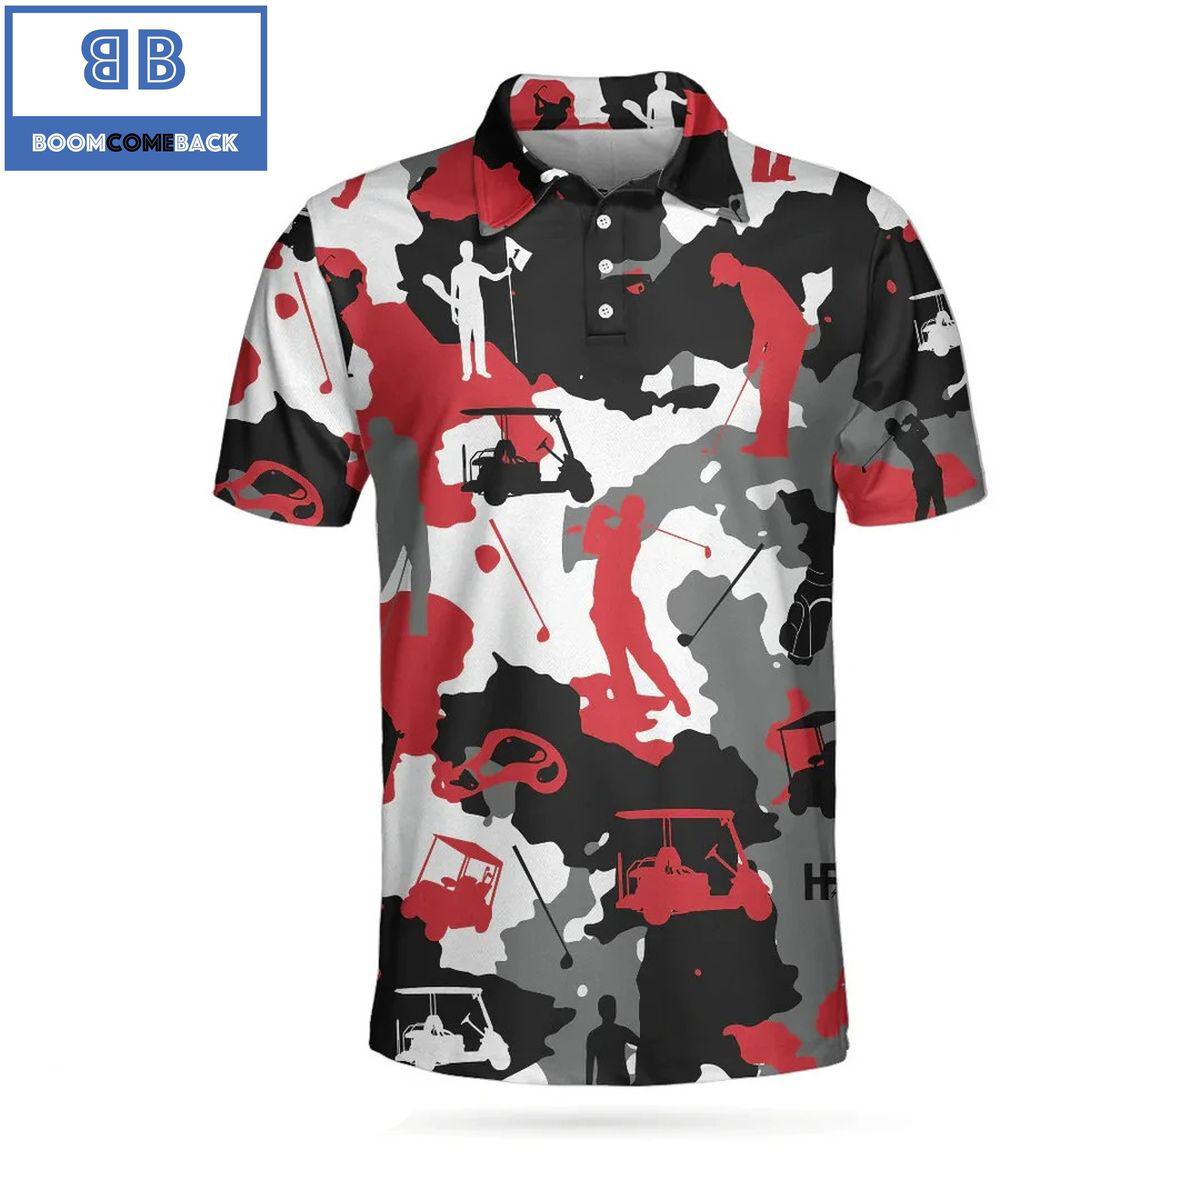 Red2BAnd2BWhite2BCamouflage2BGolf2BWith2BGolfer2BSilhouette2BAthletic2BCollared2BMens2BPolo2BShirt2B3 9w8qq